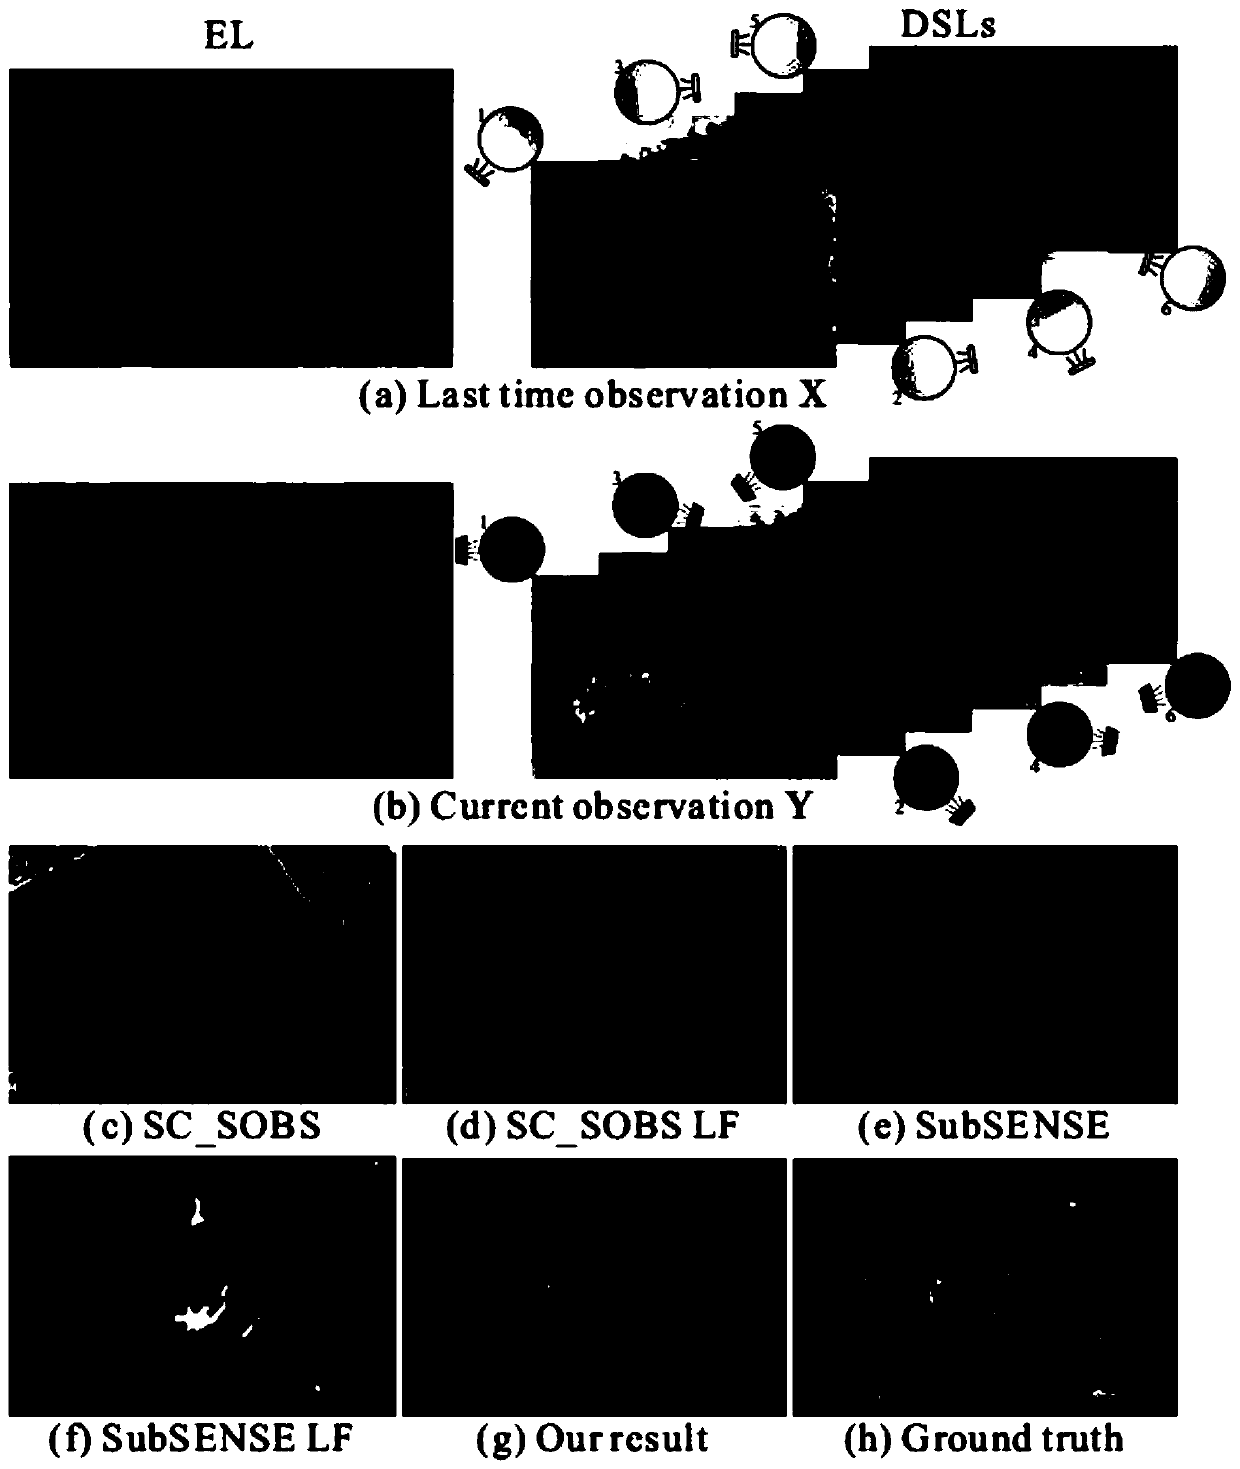 High-precision image registration method under the condition of scene and illumination changes